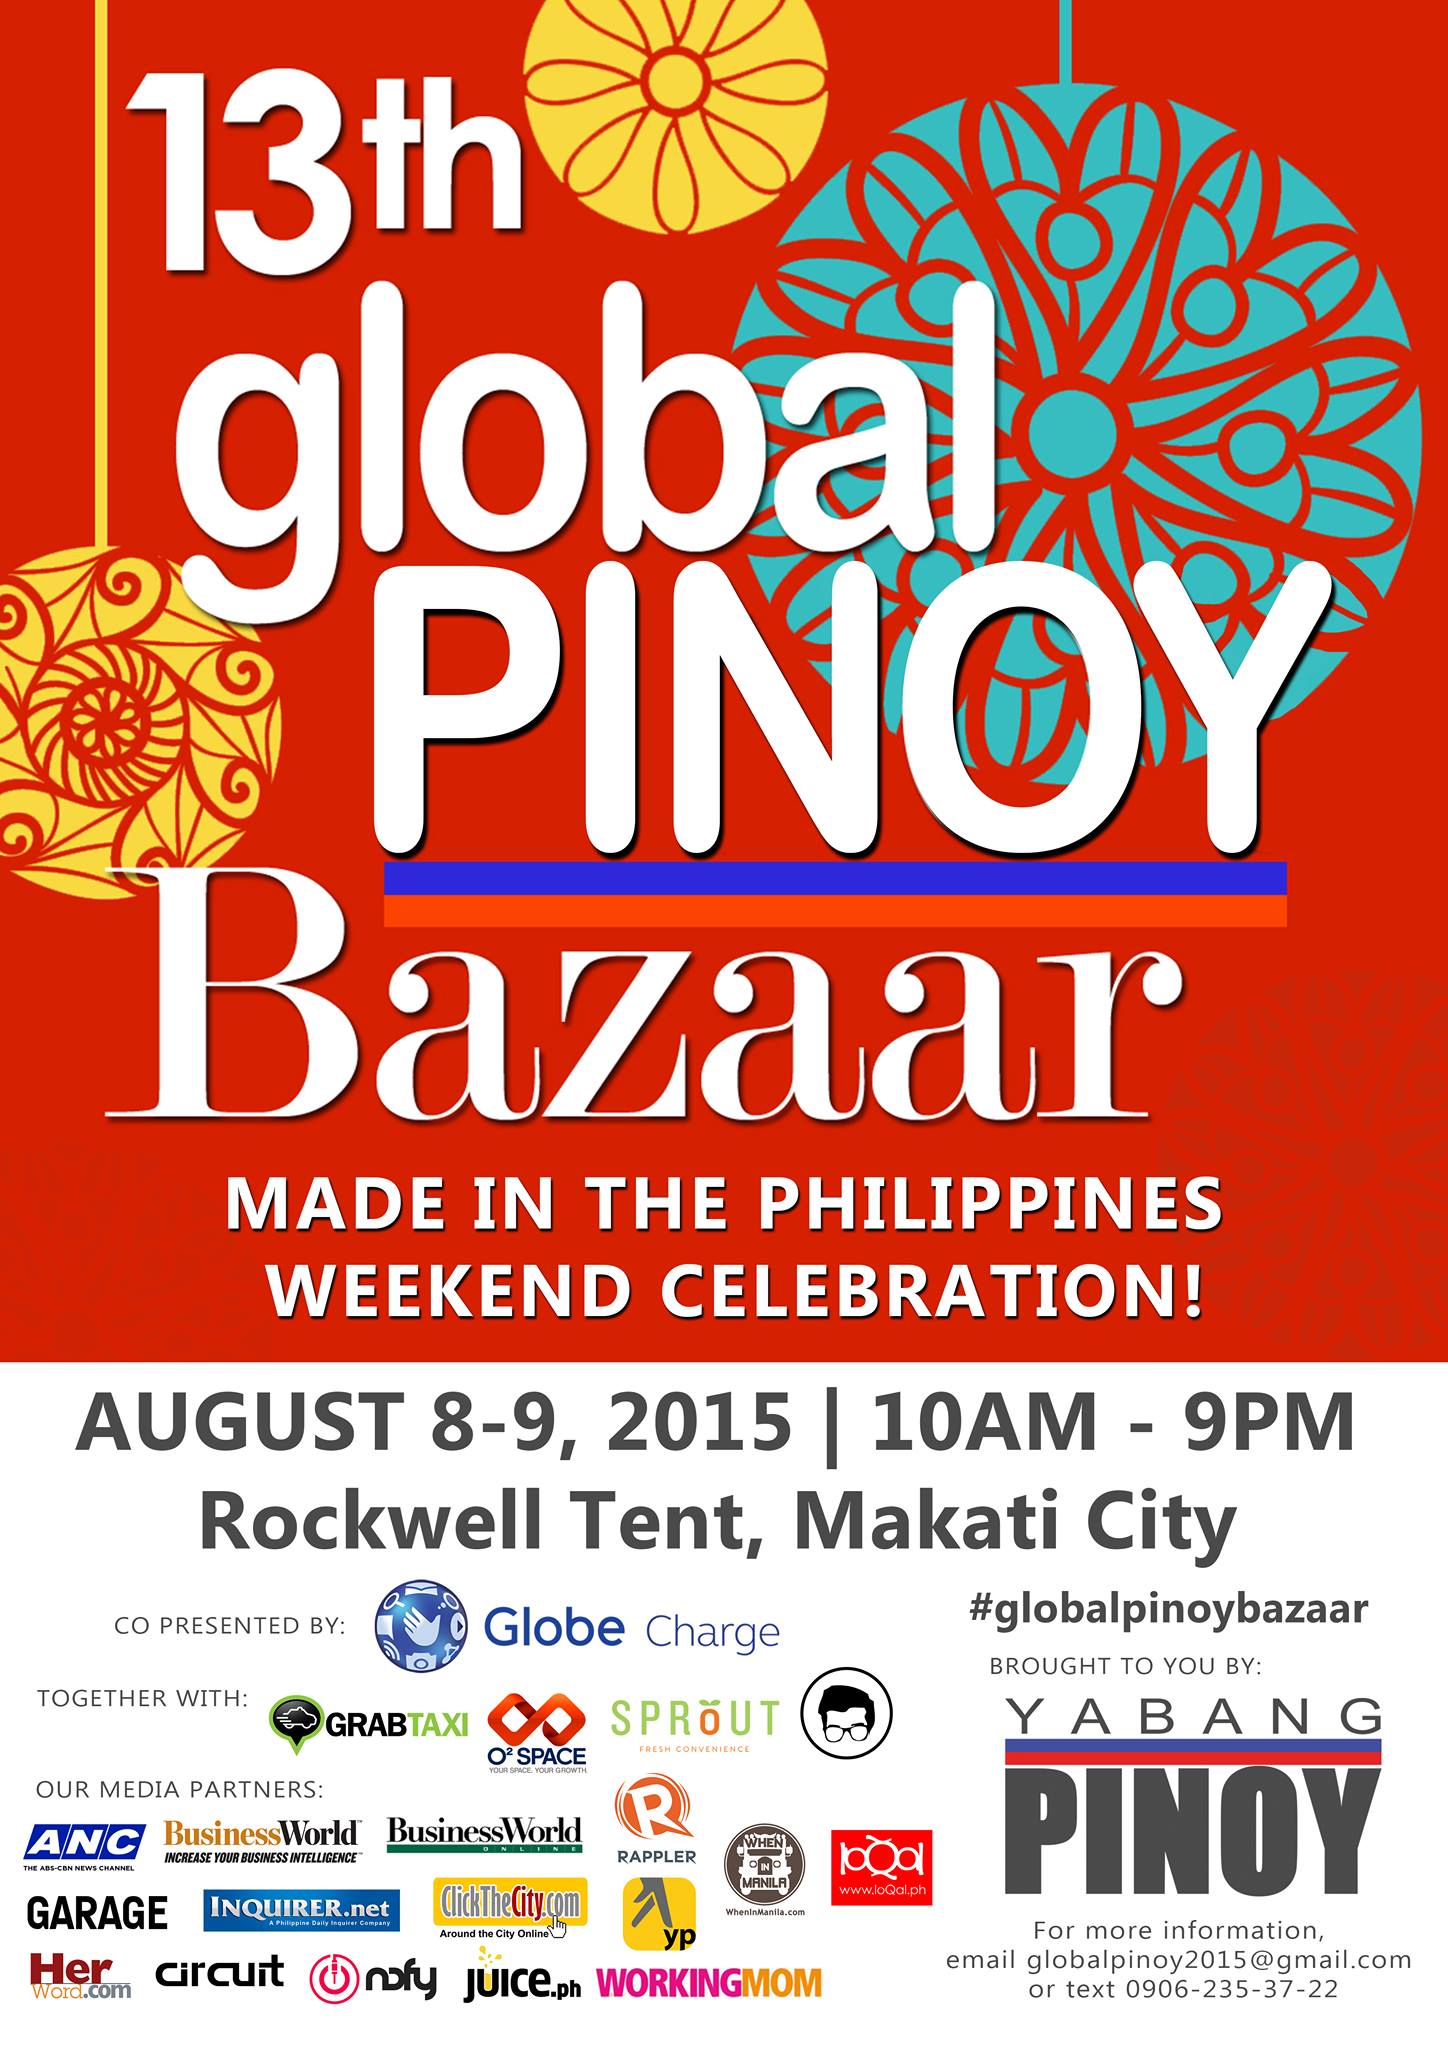 13th Global Pinoy Bazaar     August 8 - August 9     Aug 8 at 10:00am to Aug 9 at 9:00pm     	     Show Map     Rockwell Tent     Rockwell Center, 1200 Makati     	     Invited by Yabang Pinoy We celebrate the the 1936 President Proclamation No. 76 or the "Made-in-the-Philippines Product Week" through the 13th Global Pinoy Bazaar. More than showcasing quality local products, the bazaar is a continuous and progressive movement where every single one of us plays the role of a leader of our nation. See you this August 8 and 9 at the Rockwell Tent, Makati City. Contact details : Mobile # : 906 235 37 22 Email address : globalpinoy2015@gmail.com ---- Global Pinoy Bazaar 2015 - Rockwell Tent Buy Made in the Philippines! Great Filipino Finds this 2015! August 8 - 9, 2015 Rockwell Tent, Makati CIty #GlobalPinoyBazaar and #GPB2015